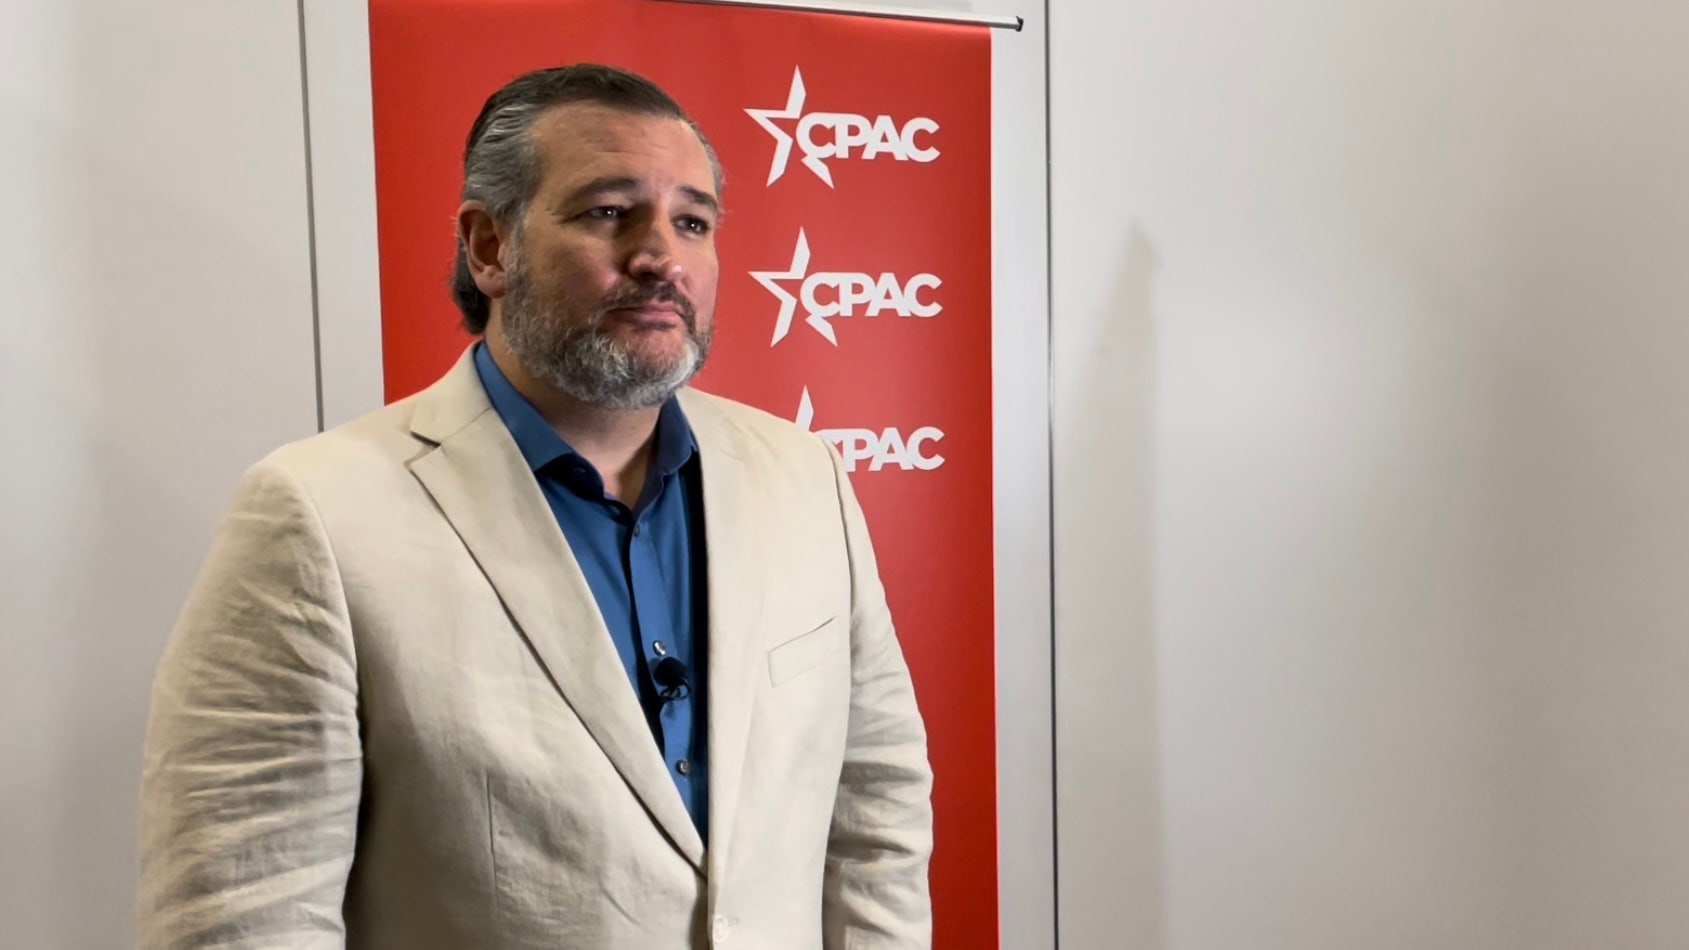 2024 Watch: Sen. Ted Cruz says he’ll ‘wait and see’ what Trump decides and then ‘make decisions’